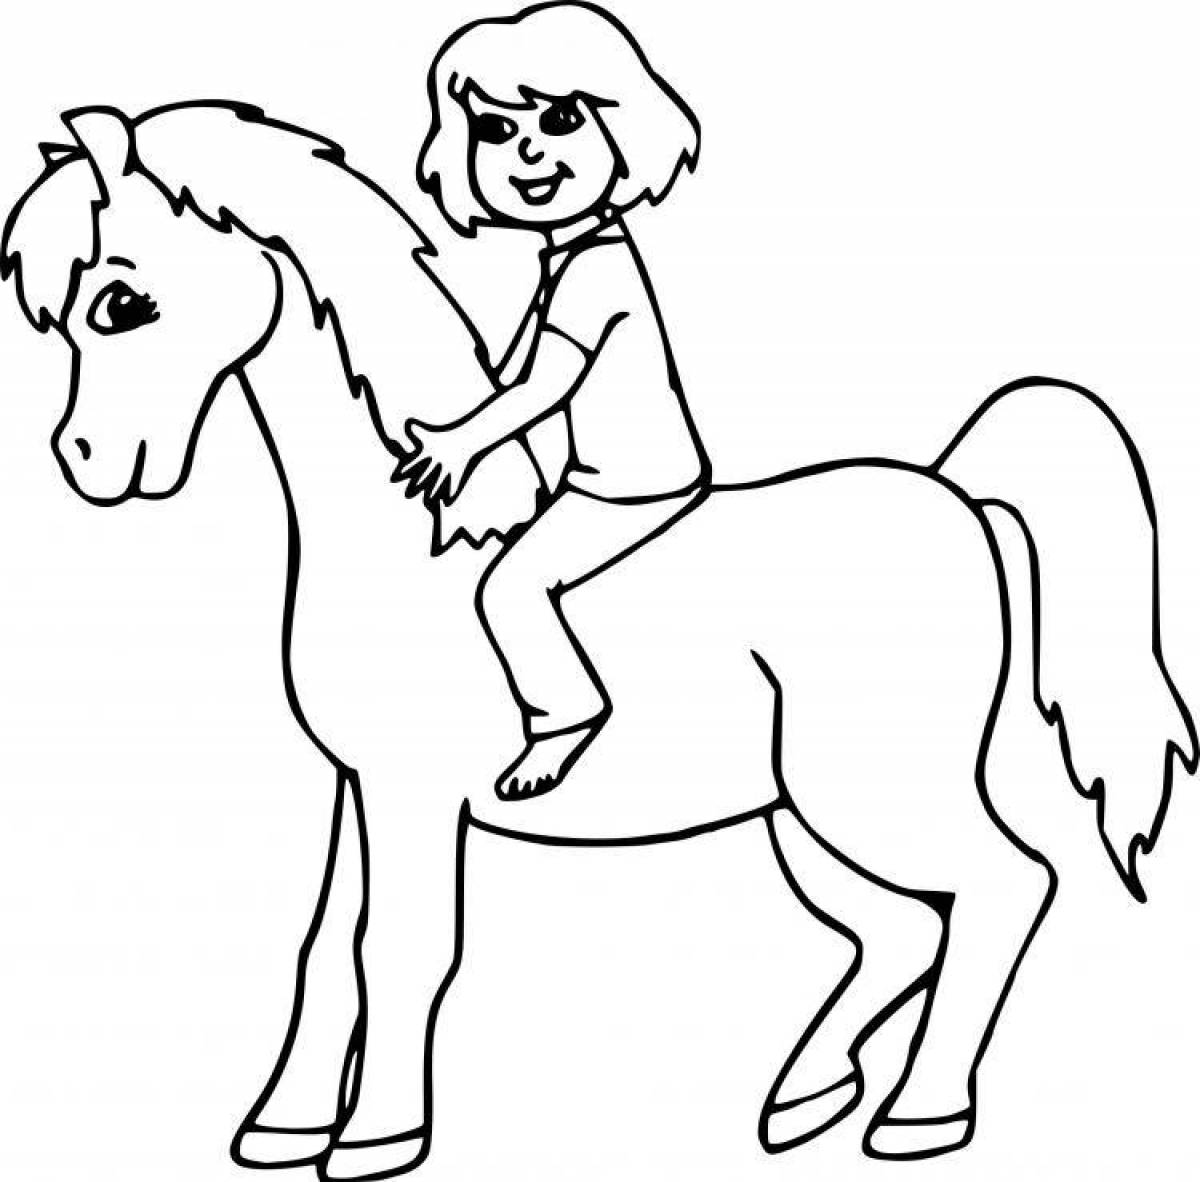 Charming horse coloring book for children 5-6 years old